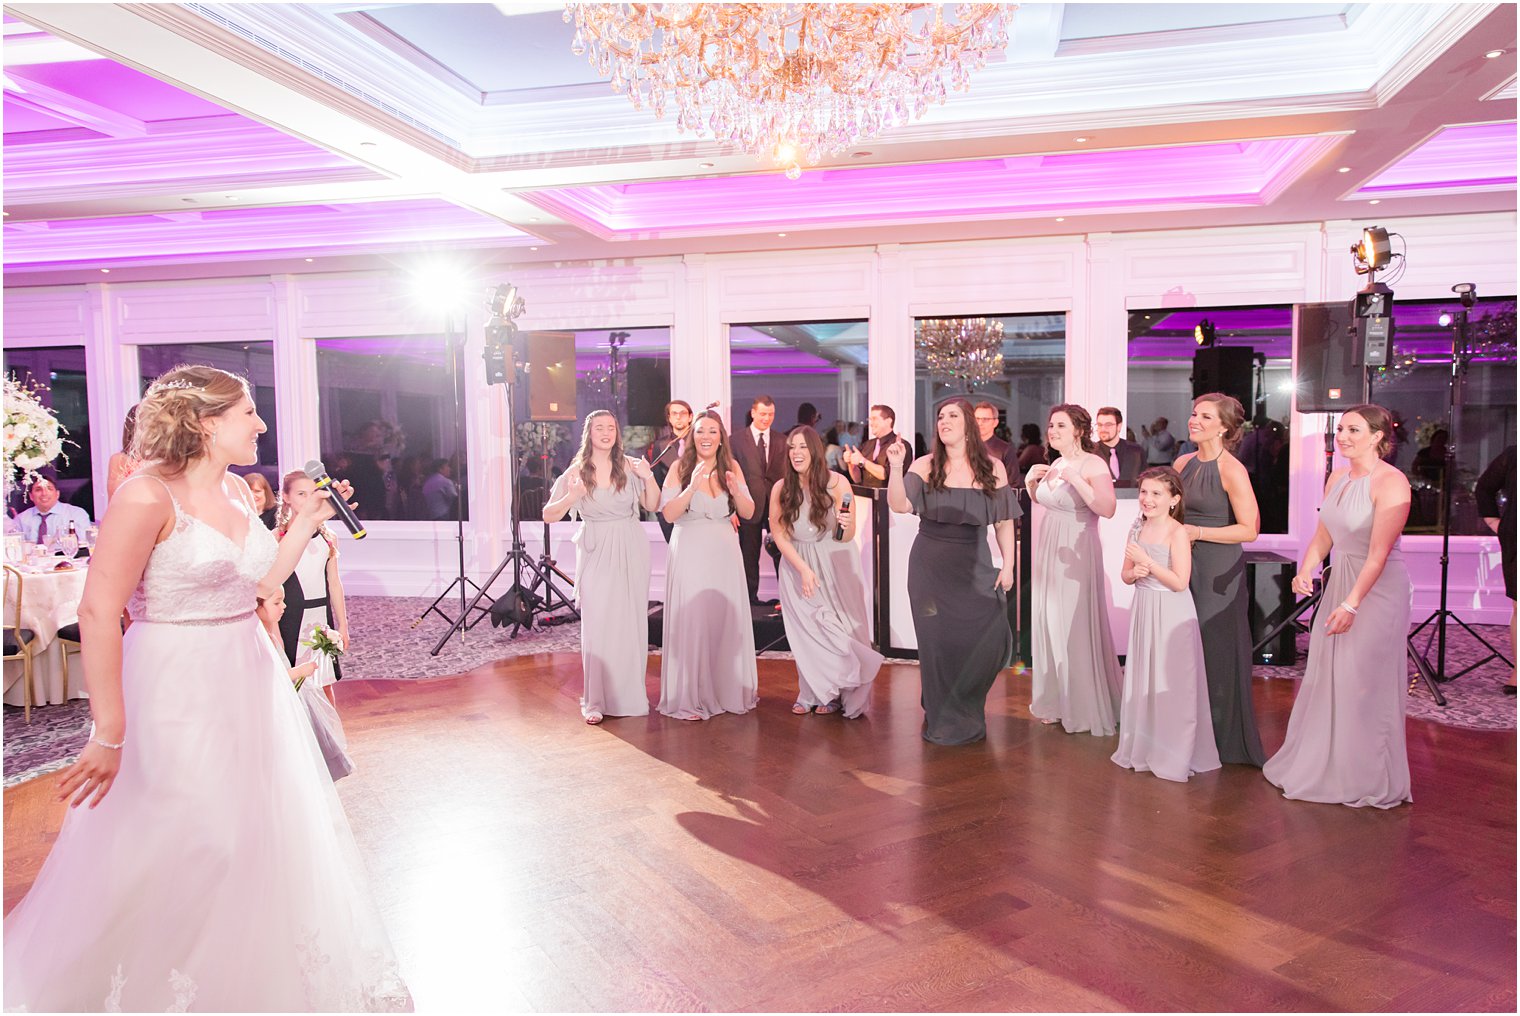 Guests dancing during wedding reception at The Mill at Lakeside Manor in Spring Lake NJ